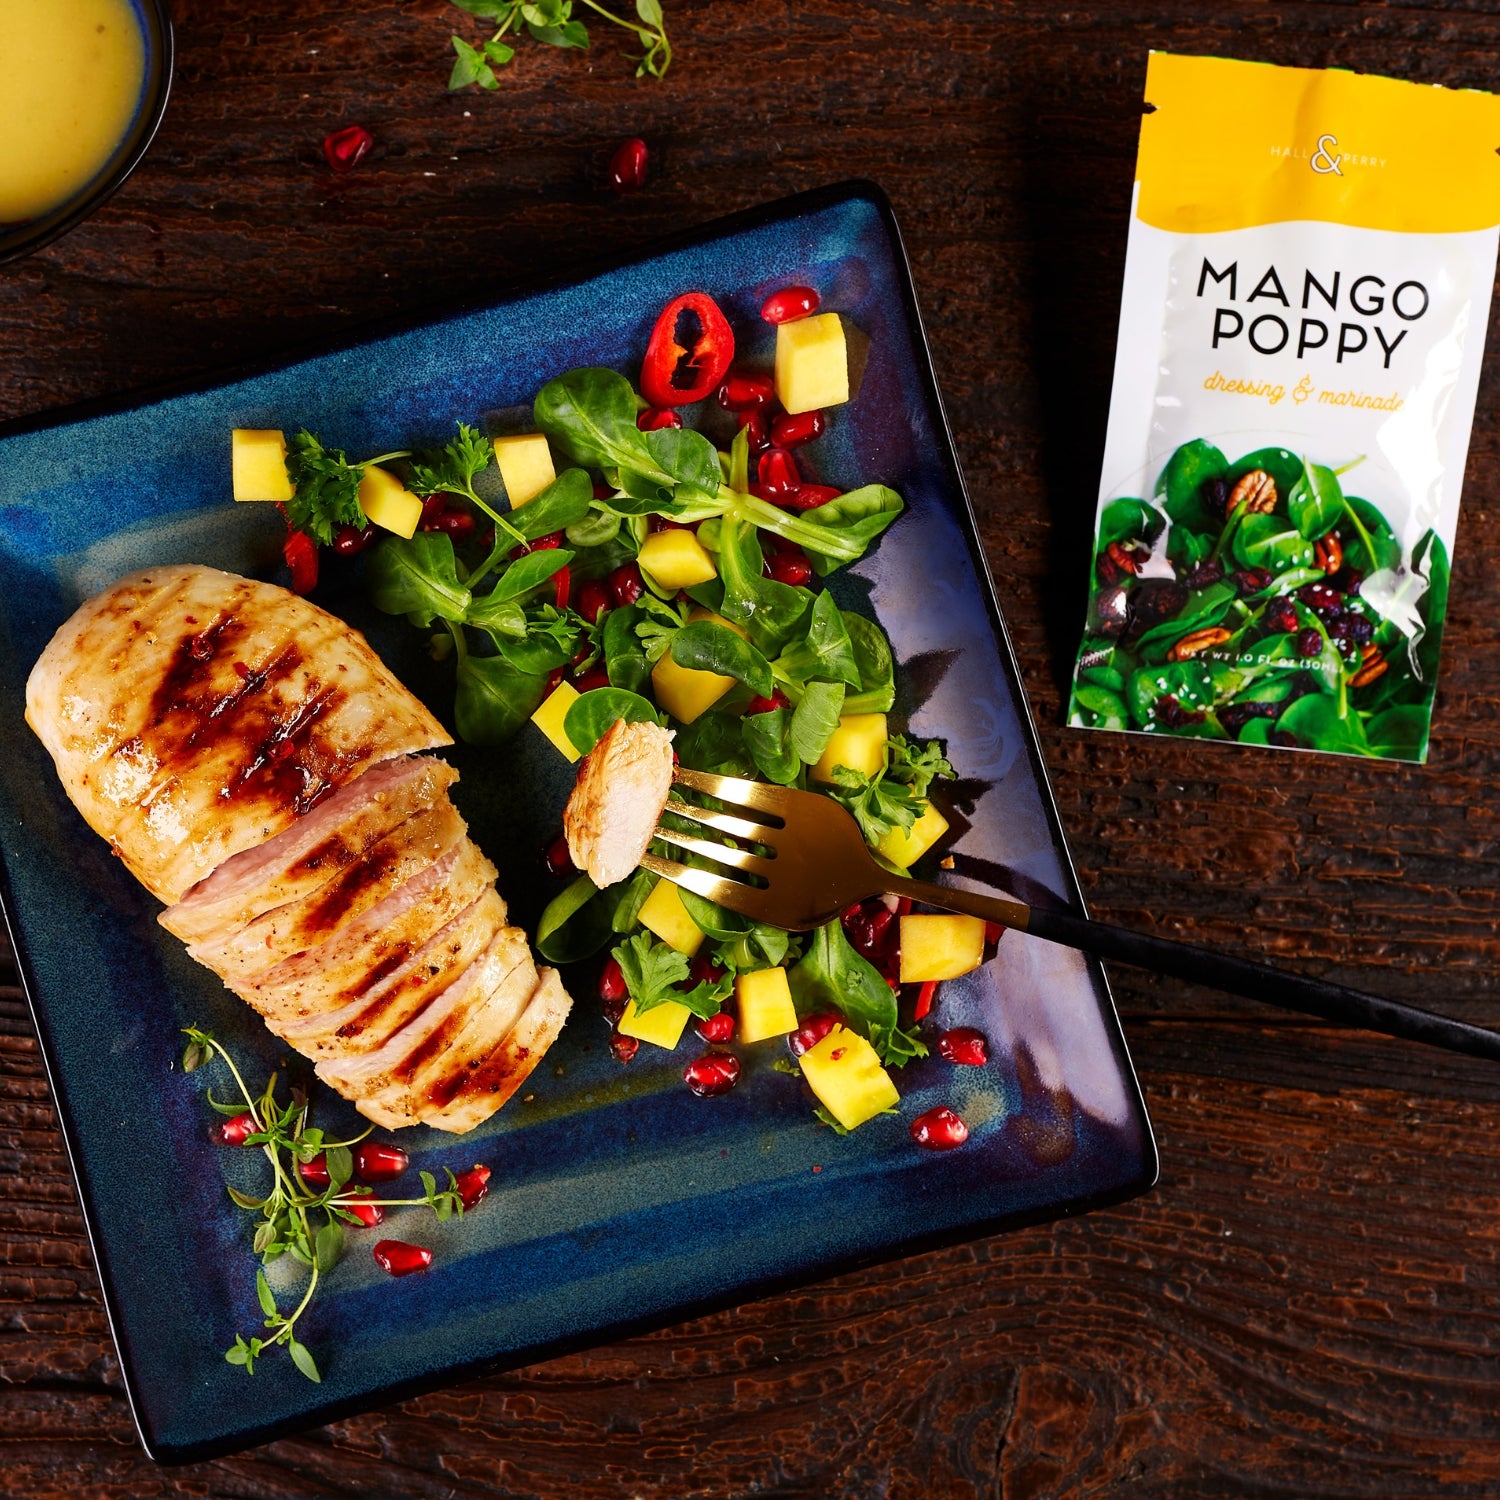 Mango Poppy single serve salad dressing packet next to plate with mango salad and chicken.